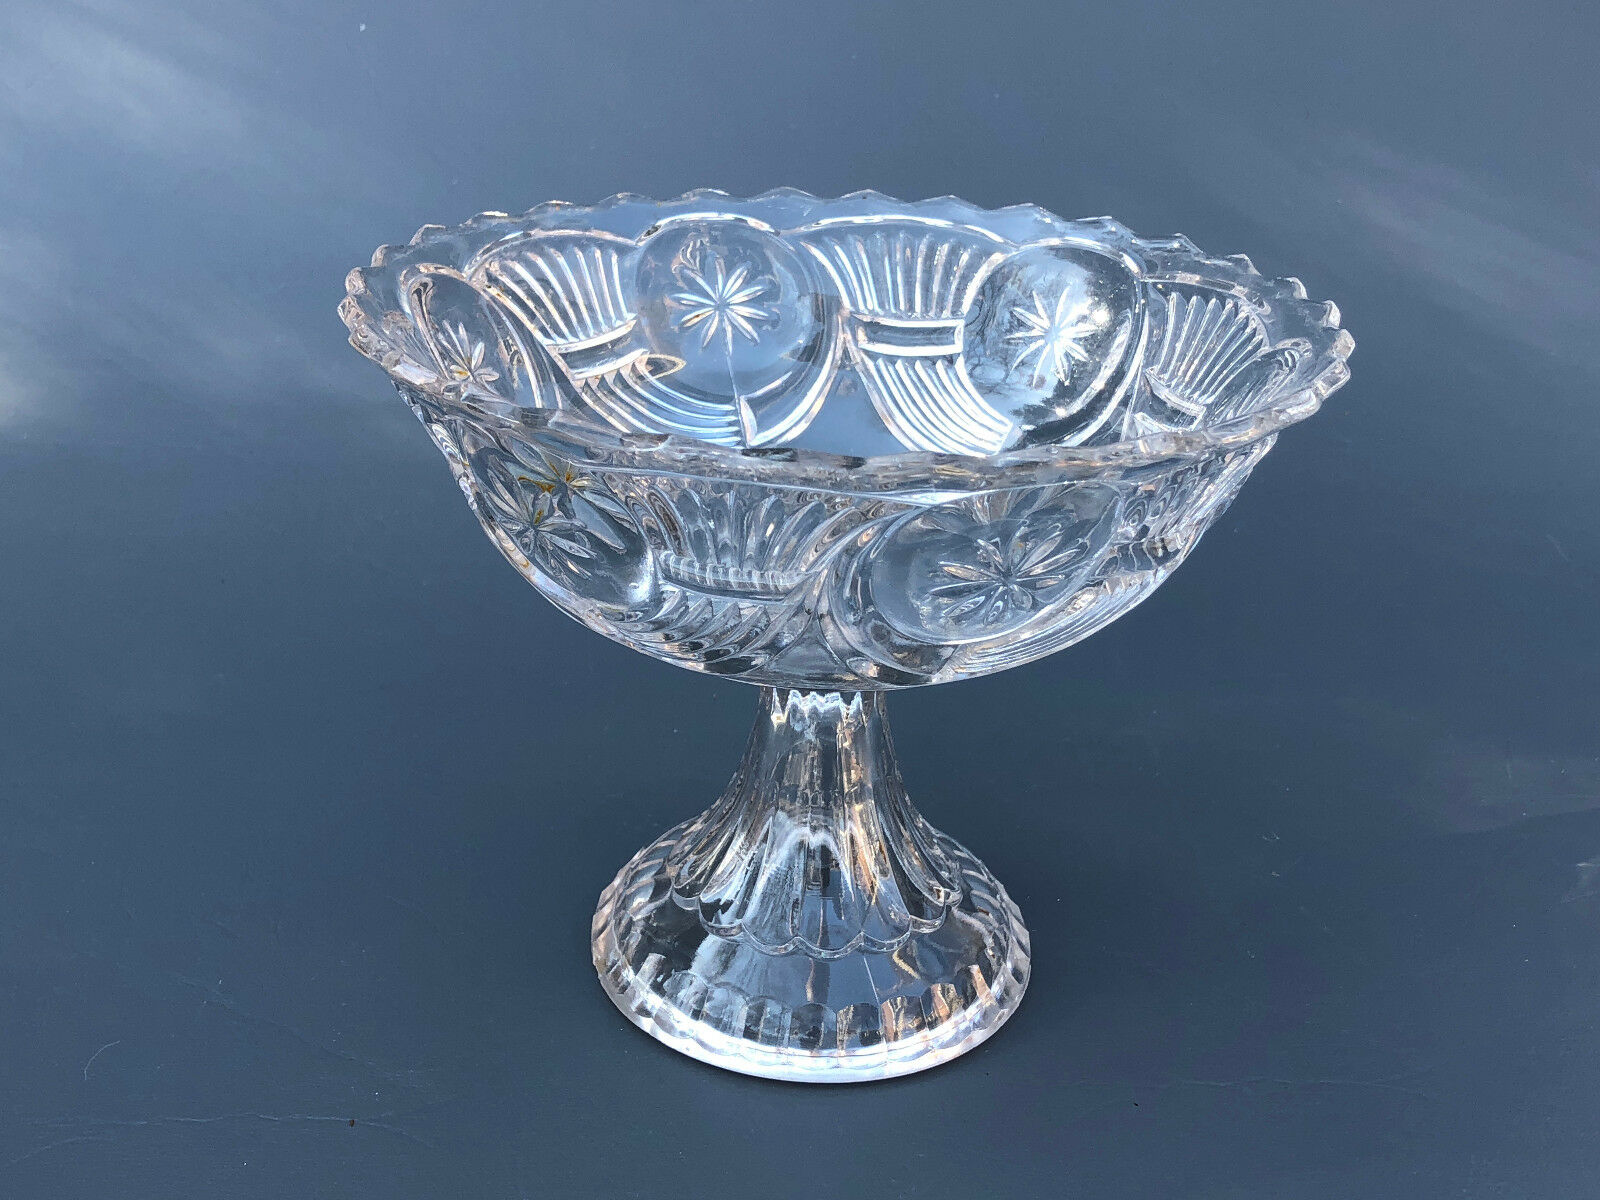 Antique Nickel Plate Glass Co. Clear Pressed Glass Compote Frosted Circle C.1870